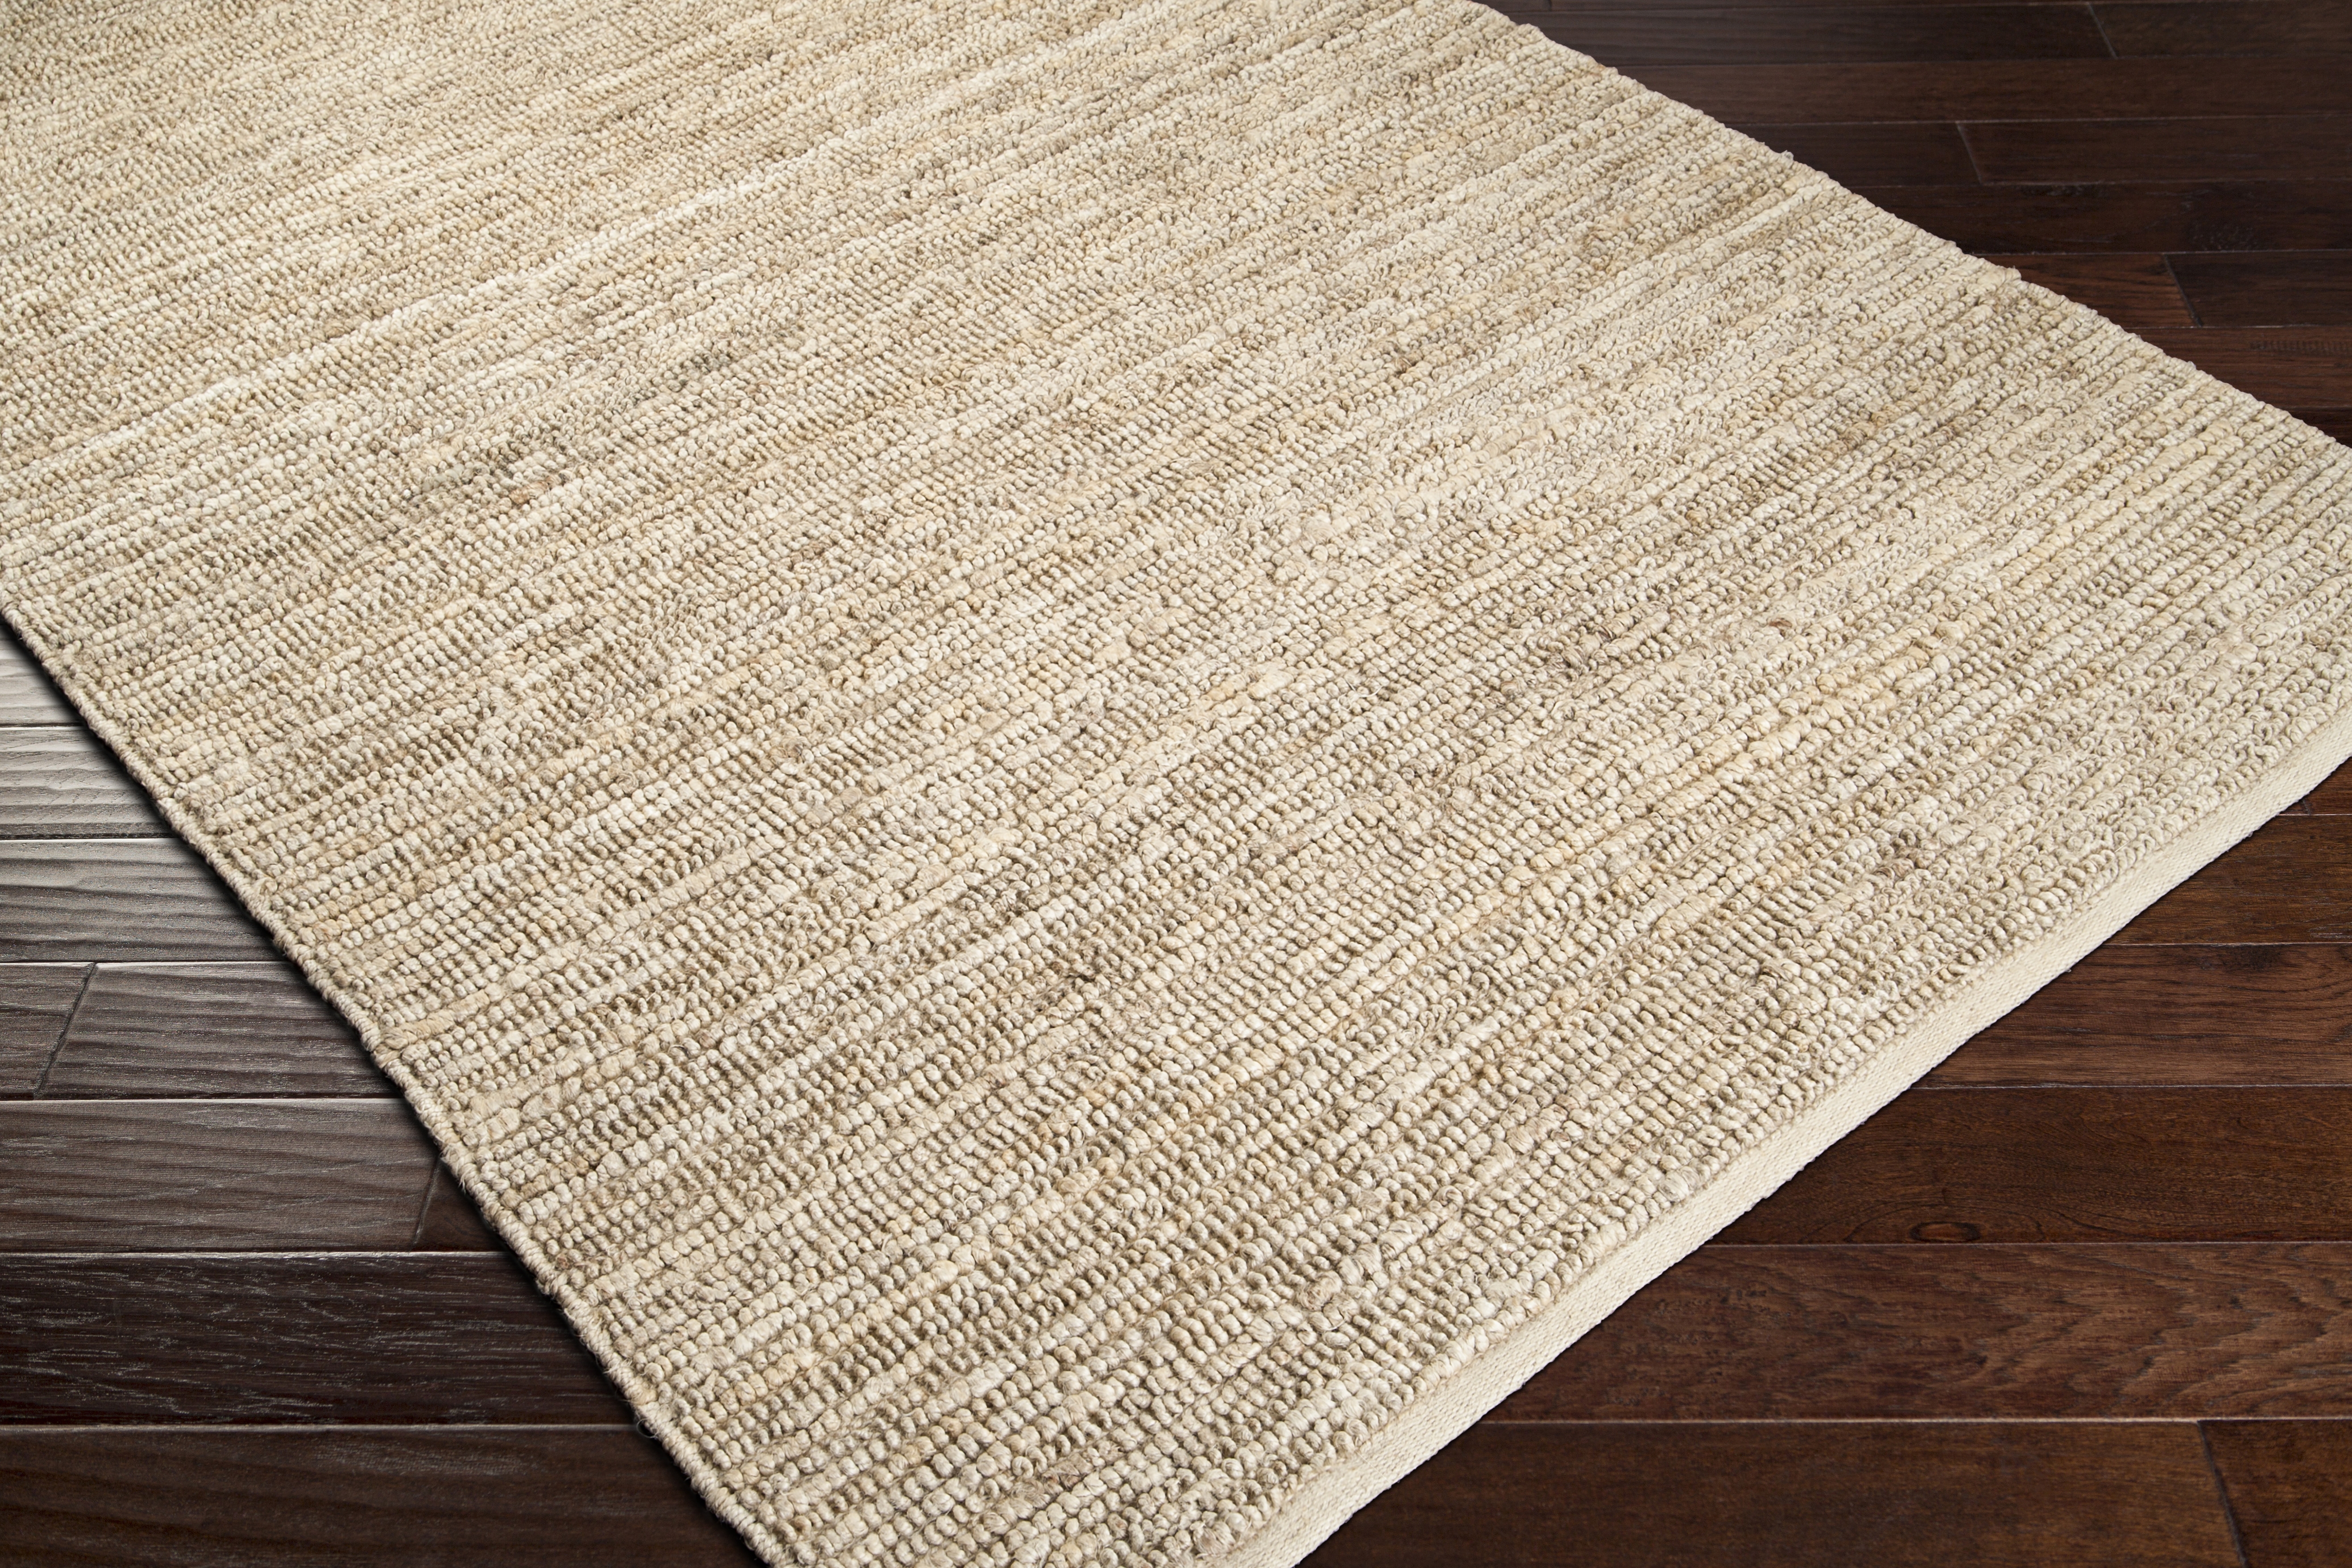 Continental Rug, 3'6" x 5'6" - Image 6